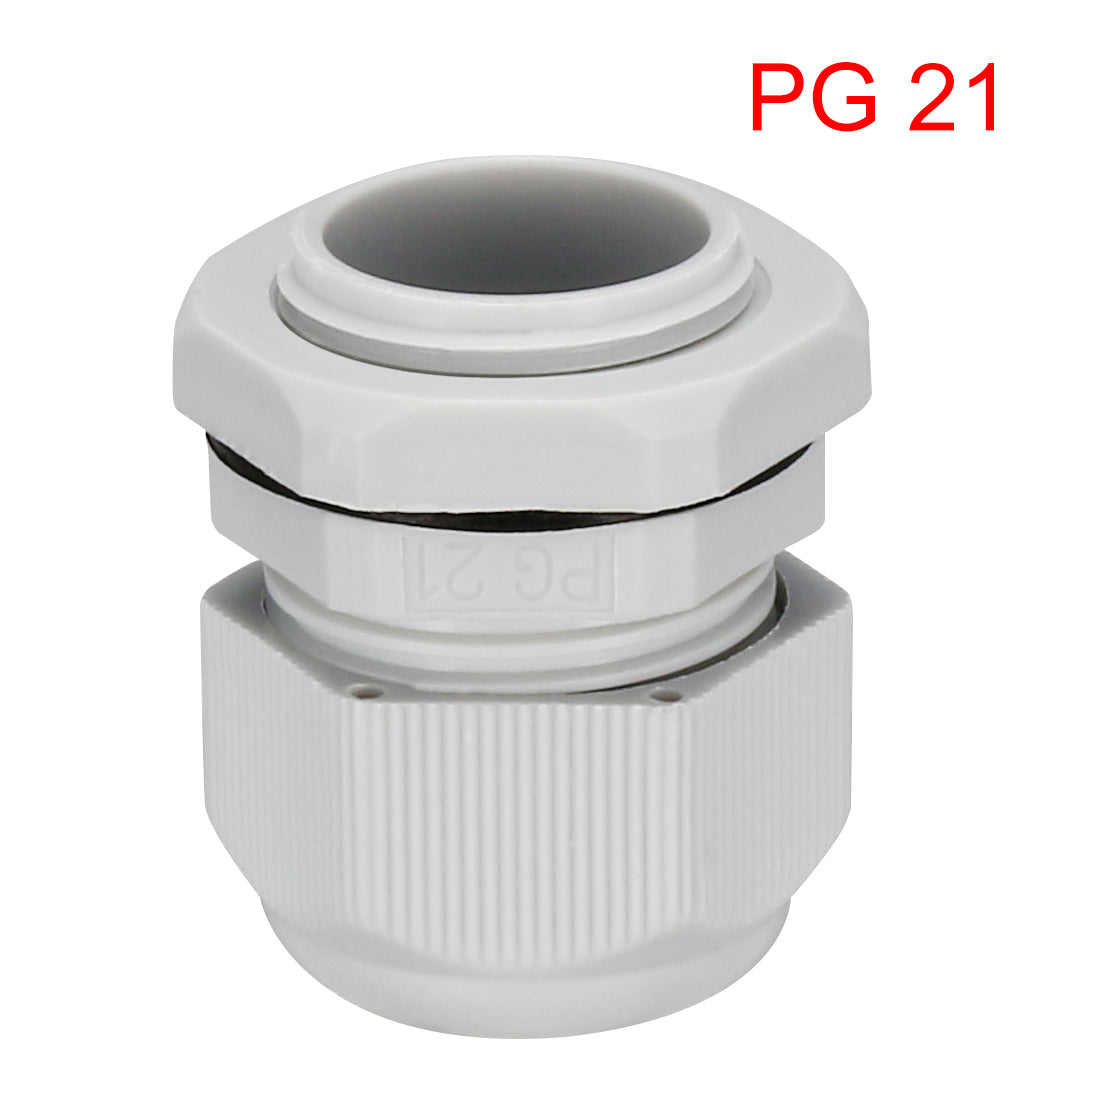 uxcell Uxcell 4Pcs PG21 Cable Gland Waterproof Connector Plastic Wire Glands Joints White for 13-18mm Dia Wires